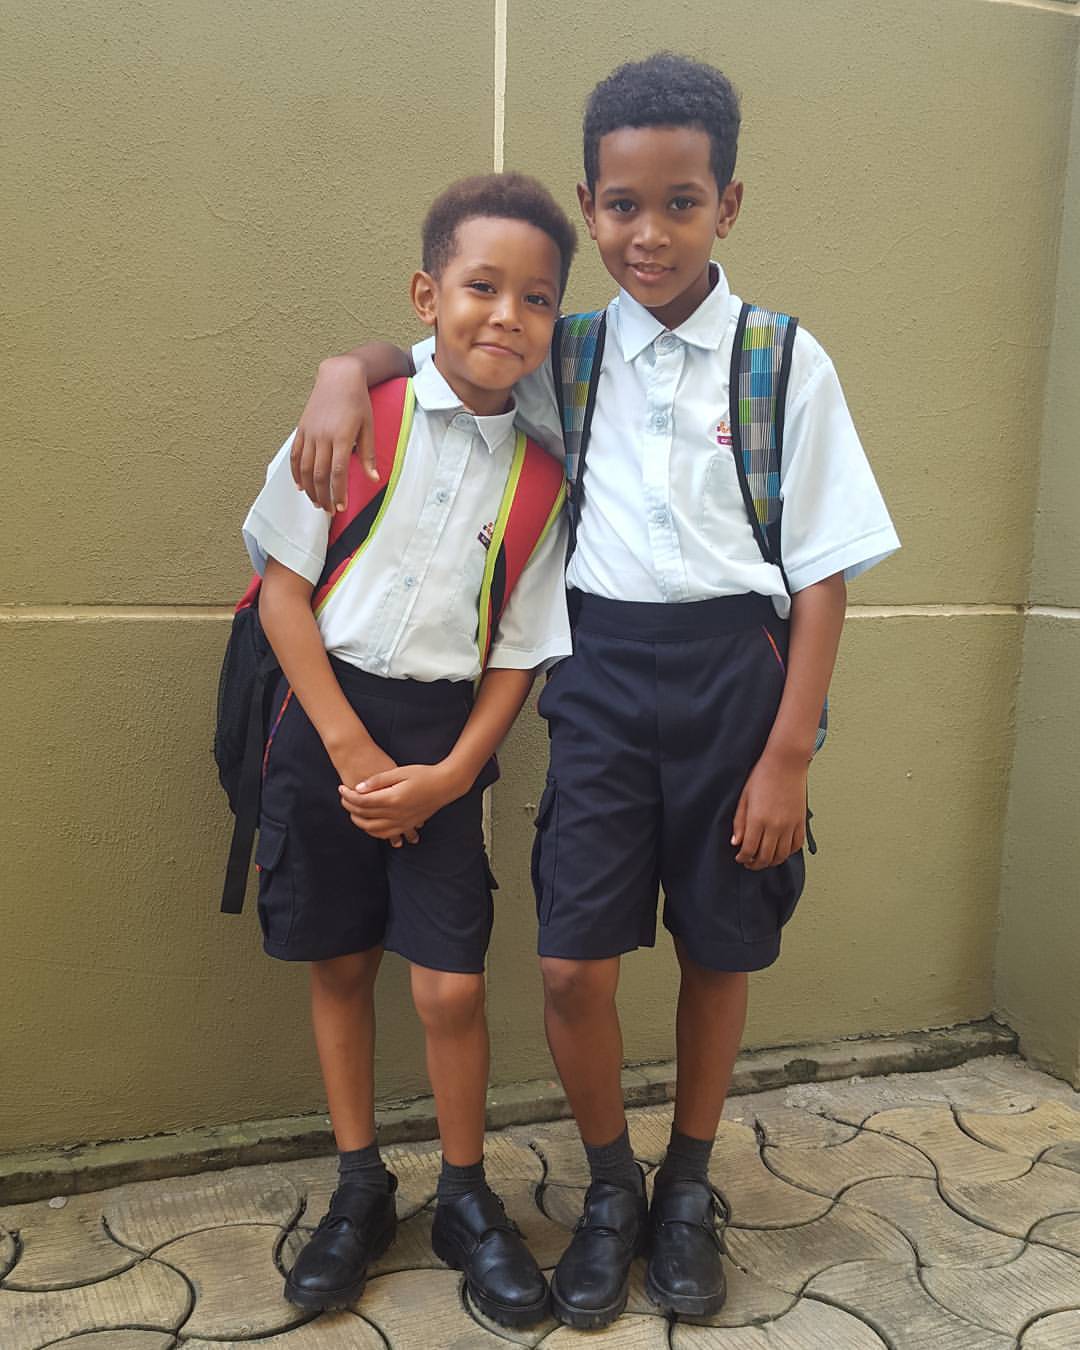 Nollywood Actress Adunni Ade Shares Photo Of Her Handsome Sons Celebrities Nigeria